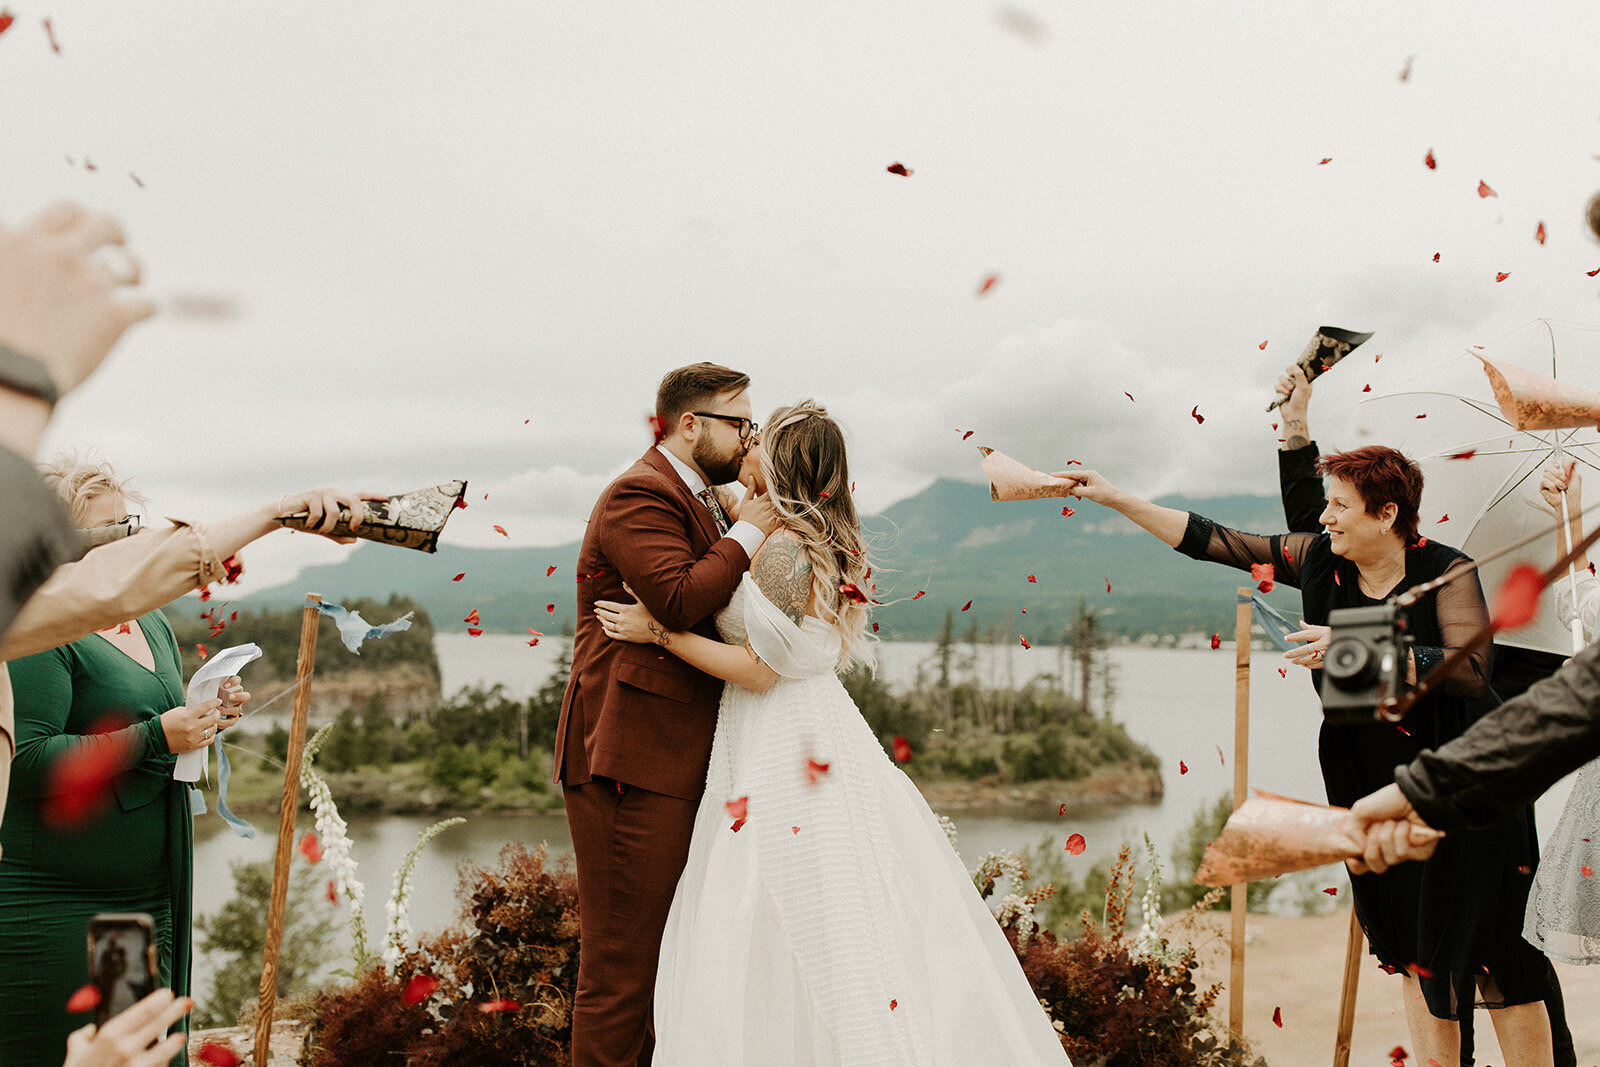 bride and groom first kiss as rose petals are thrown over them